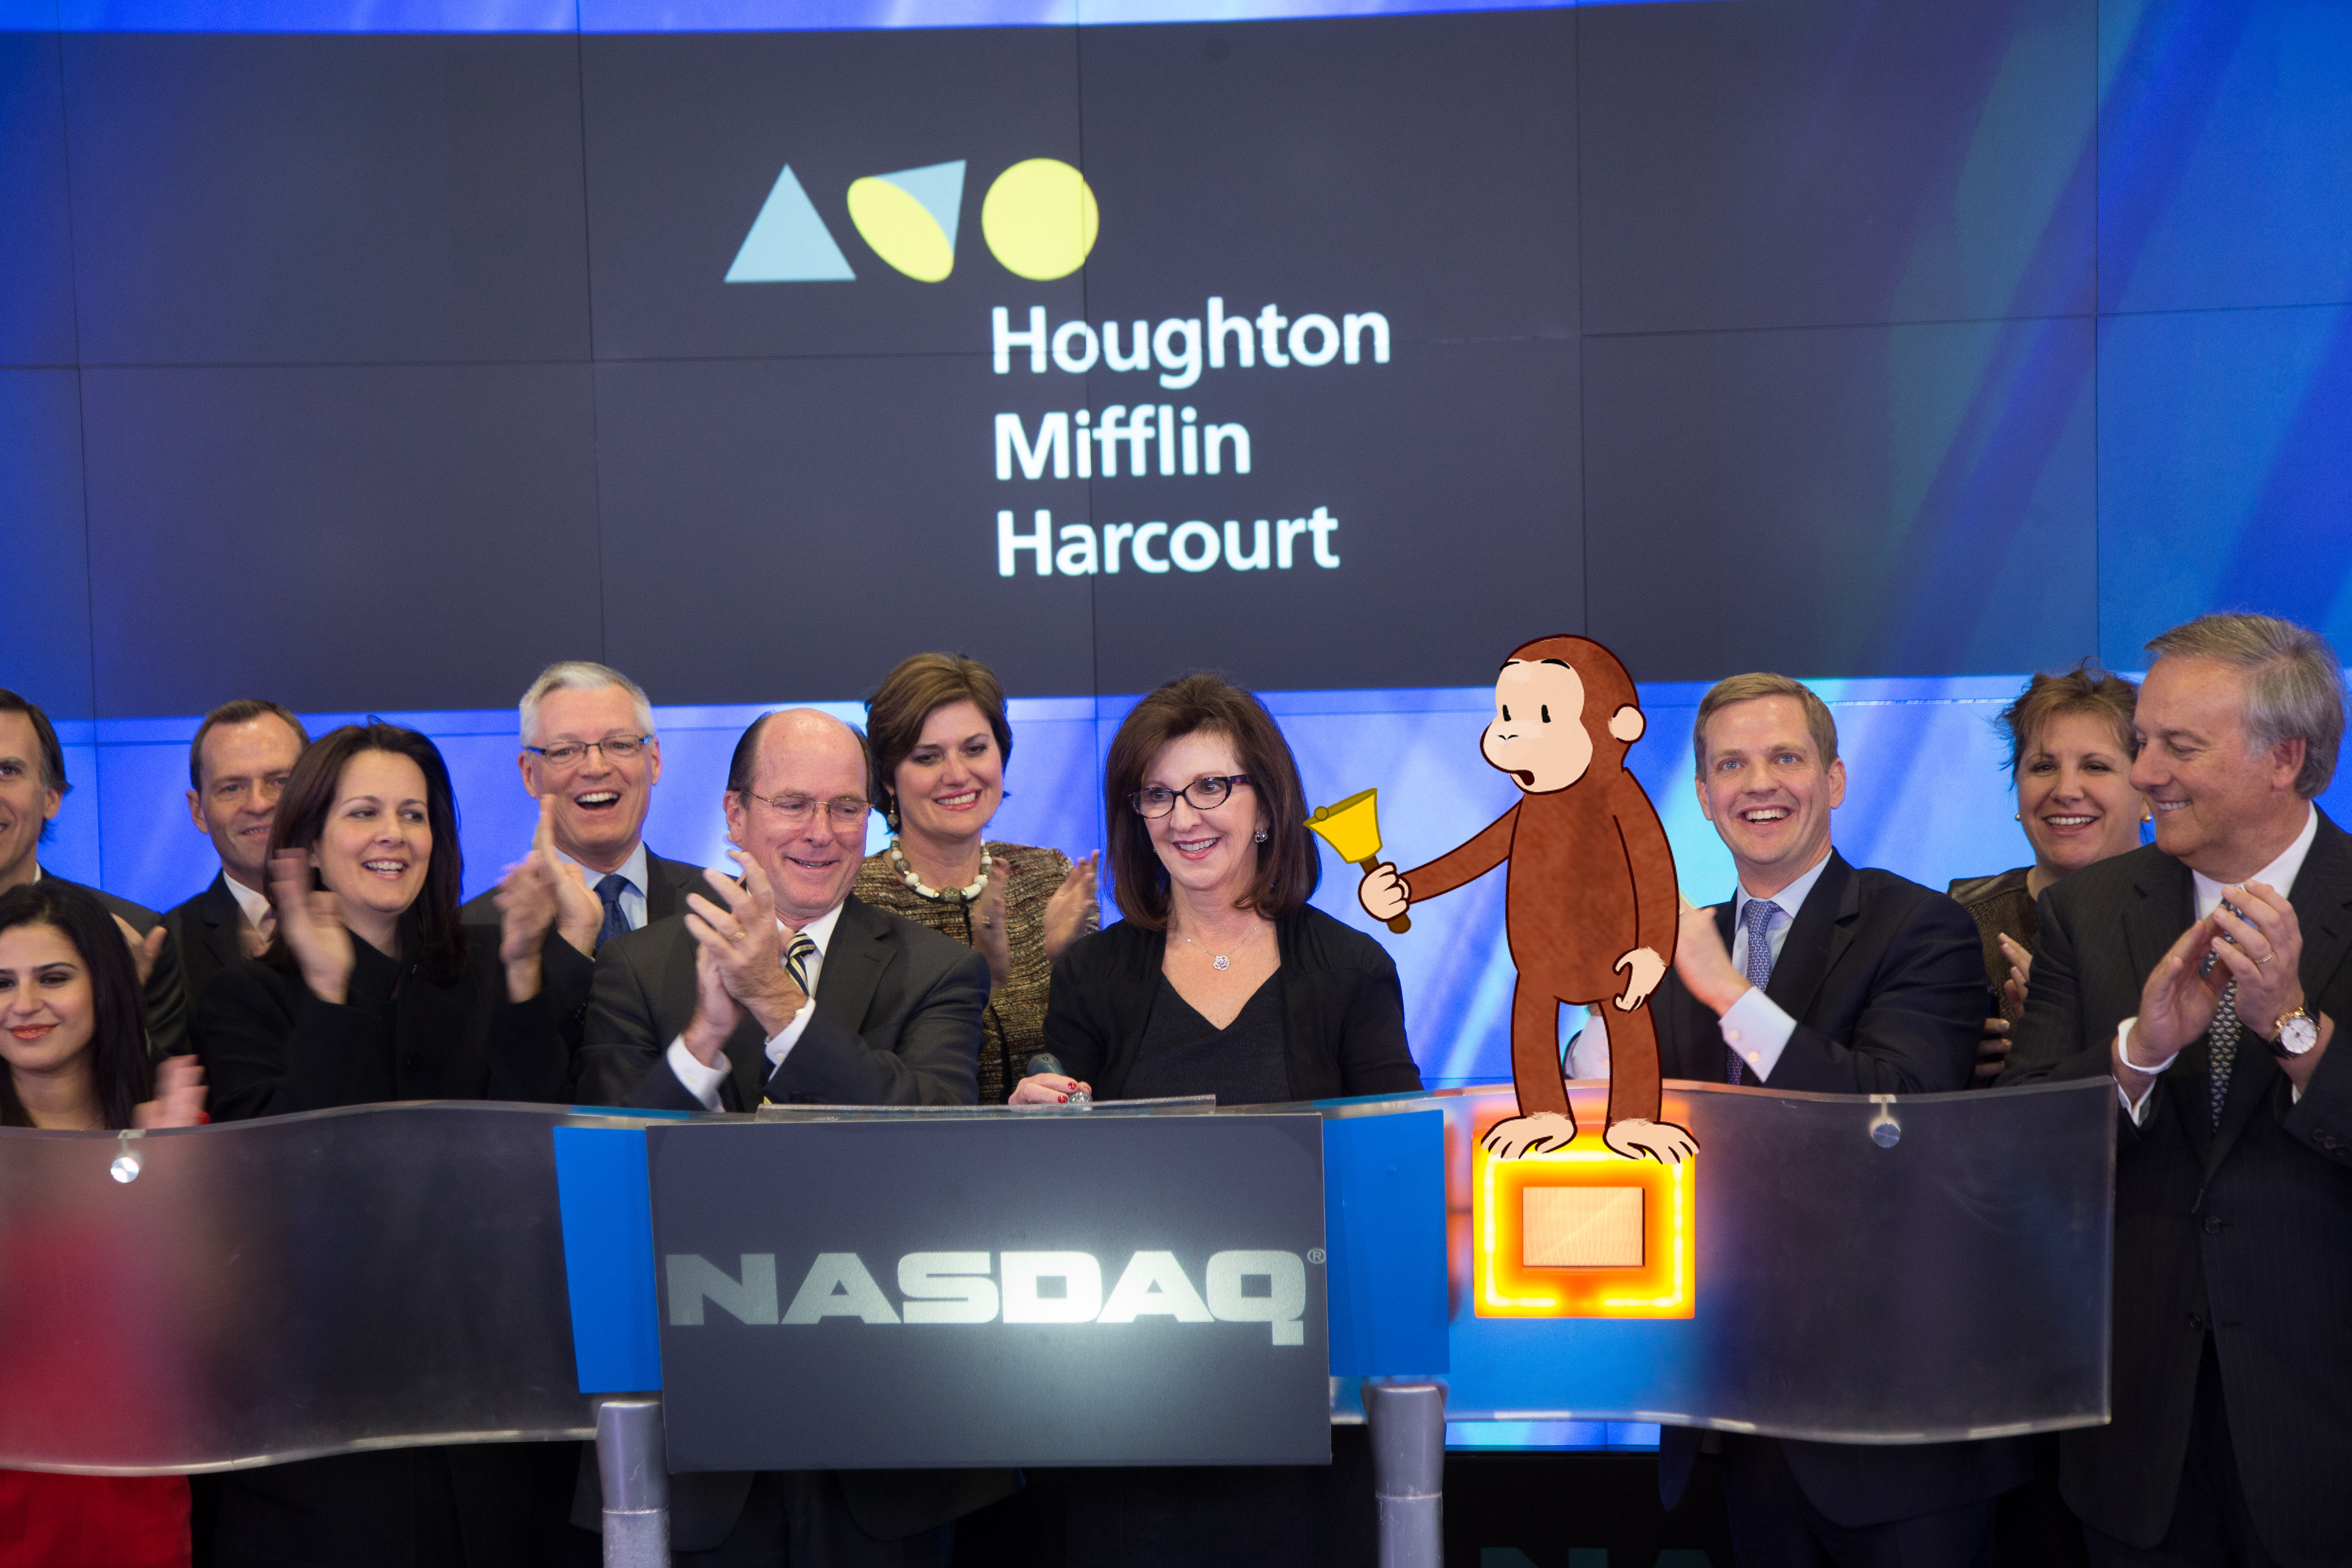 2013 IPO at NASDAQ. Curious George rings the bell with HMH CEO Linda Zecher and Executive Leadership